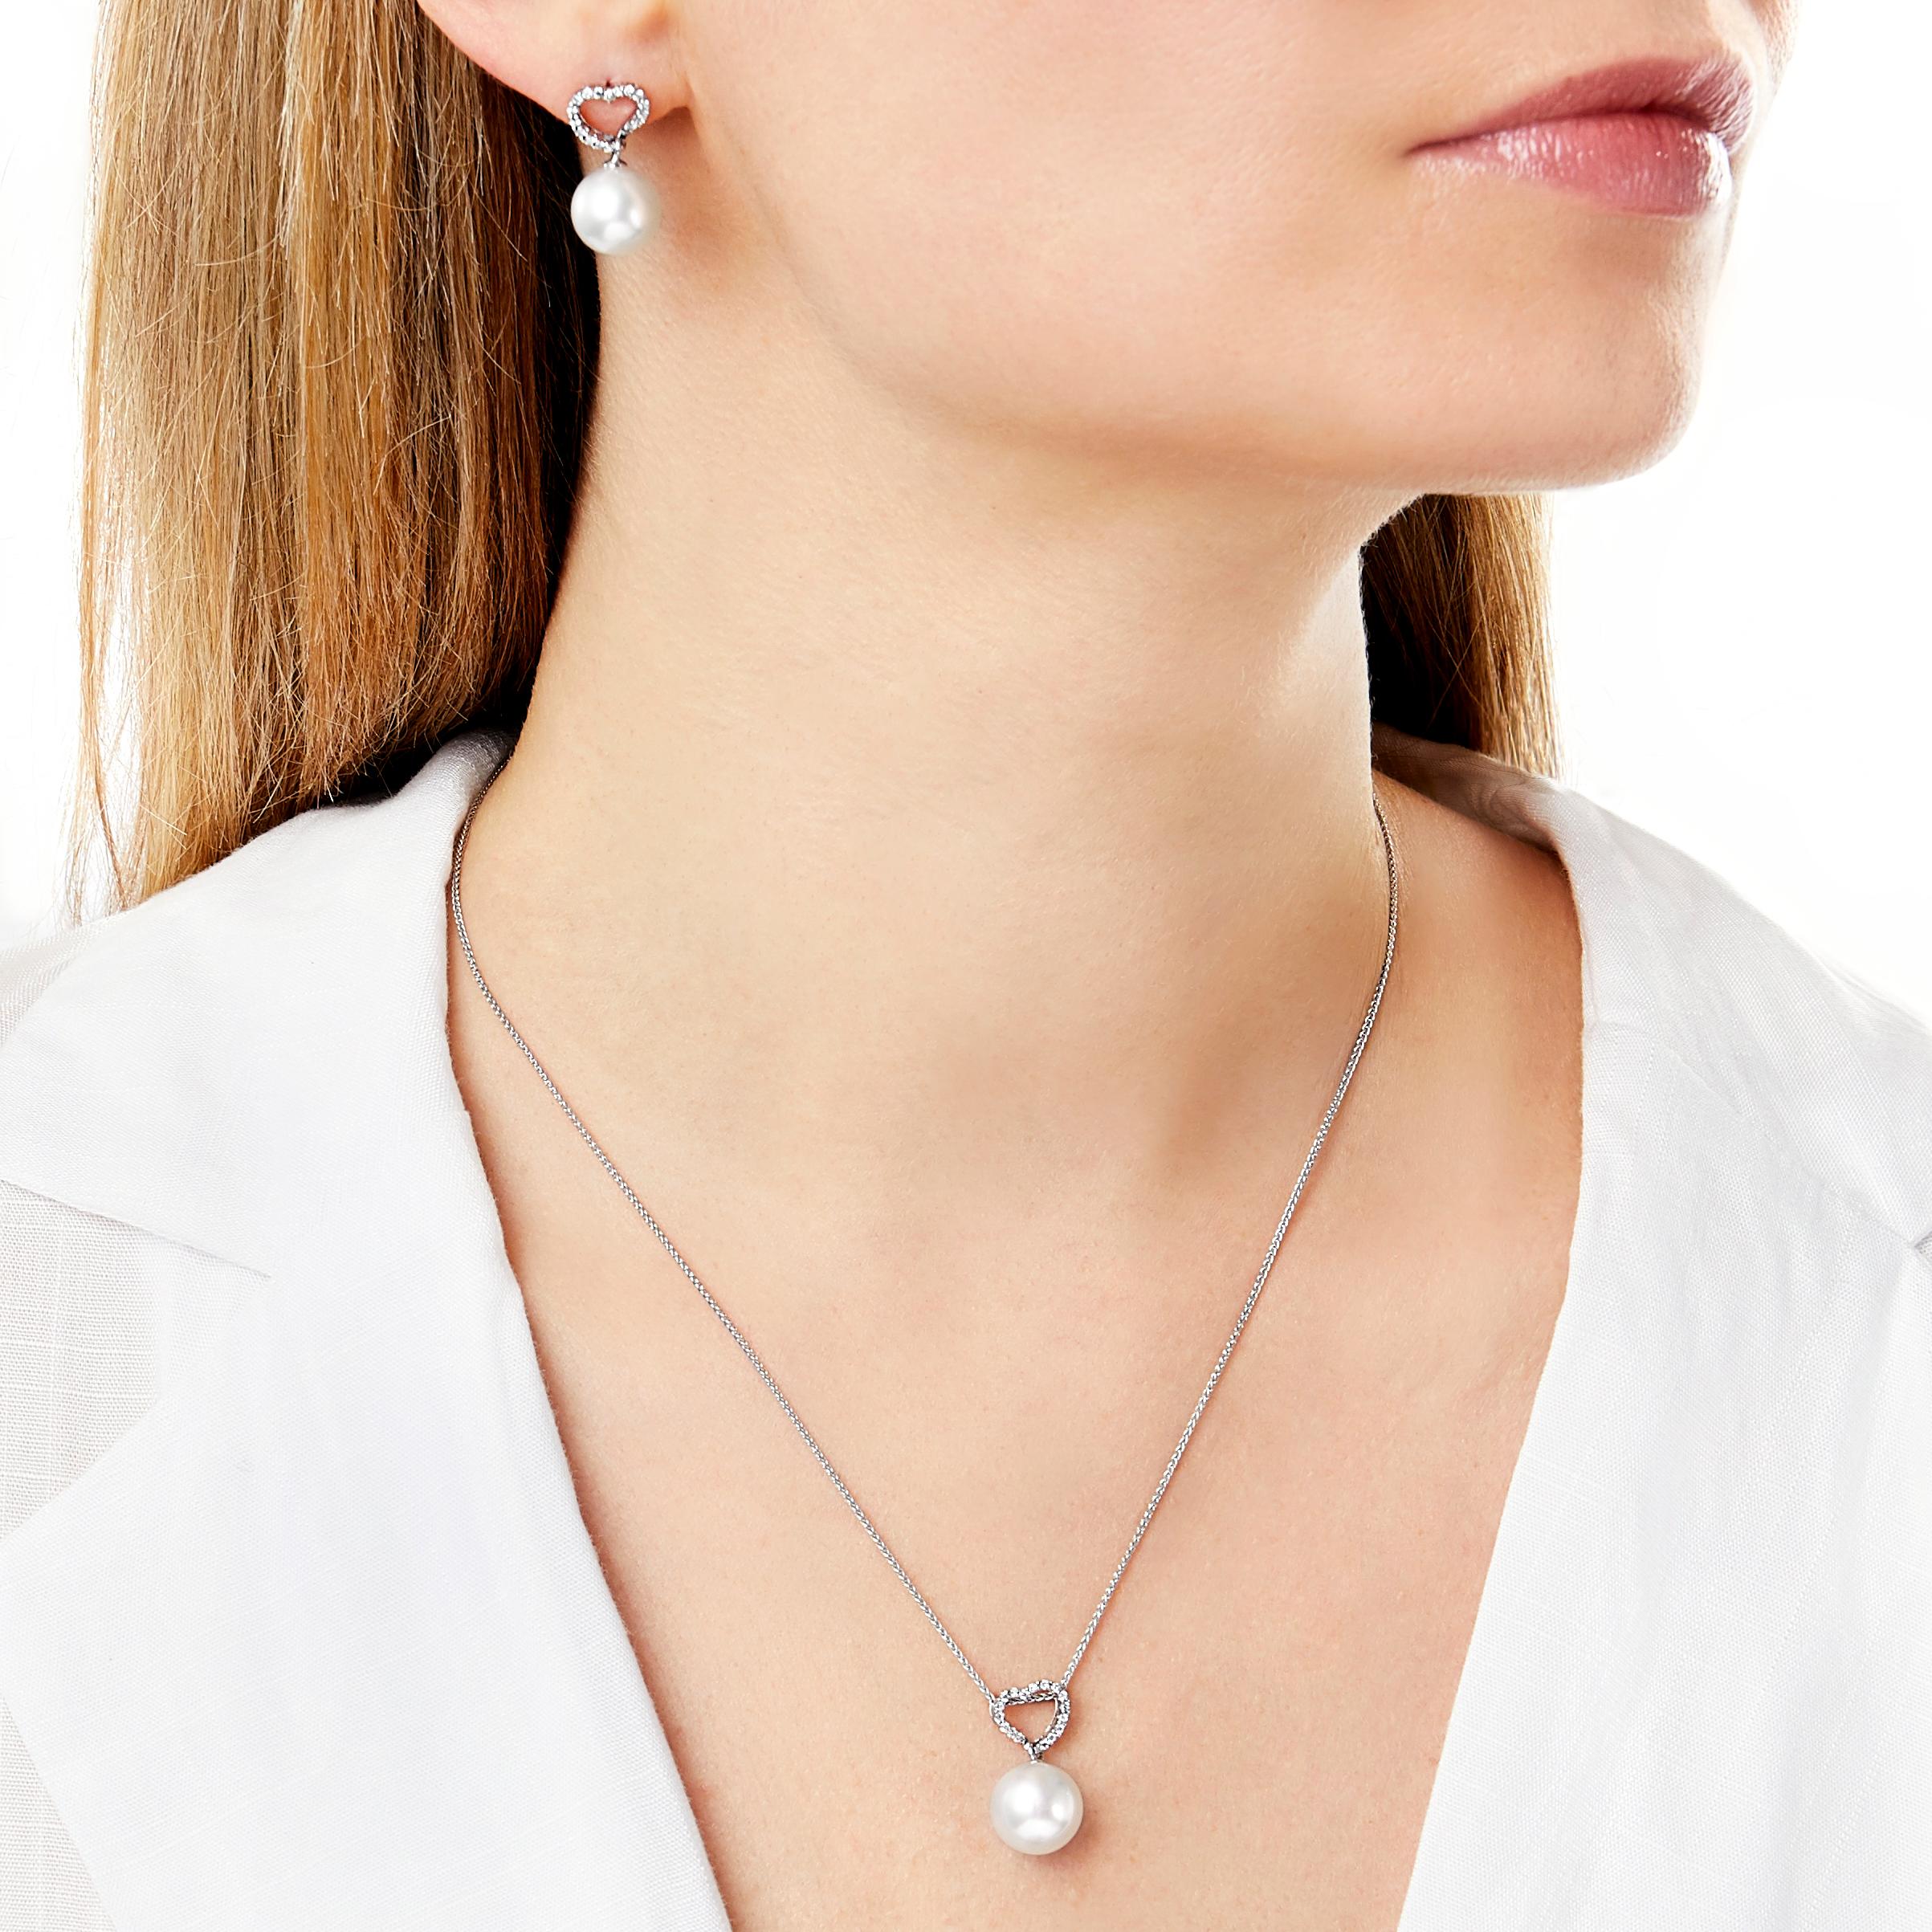 This beautiful pendant by Yoko London features a spectacular 11-12mm Australian South Sea pearl, set beneath a delicate diamond heart motif. Classic and timeless, this pendant is perfect for any occasion and is also available with matching earrings.